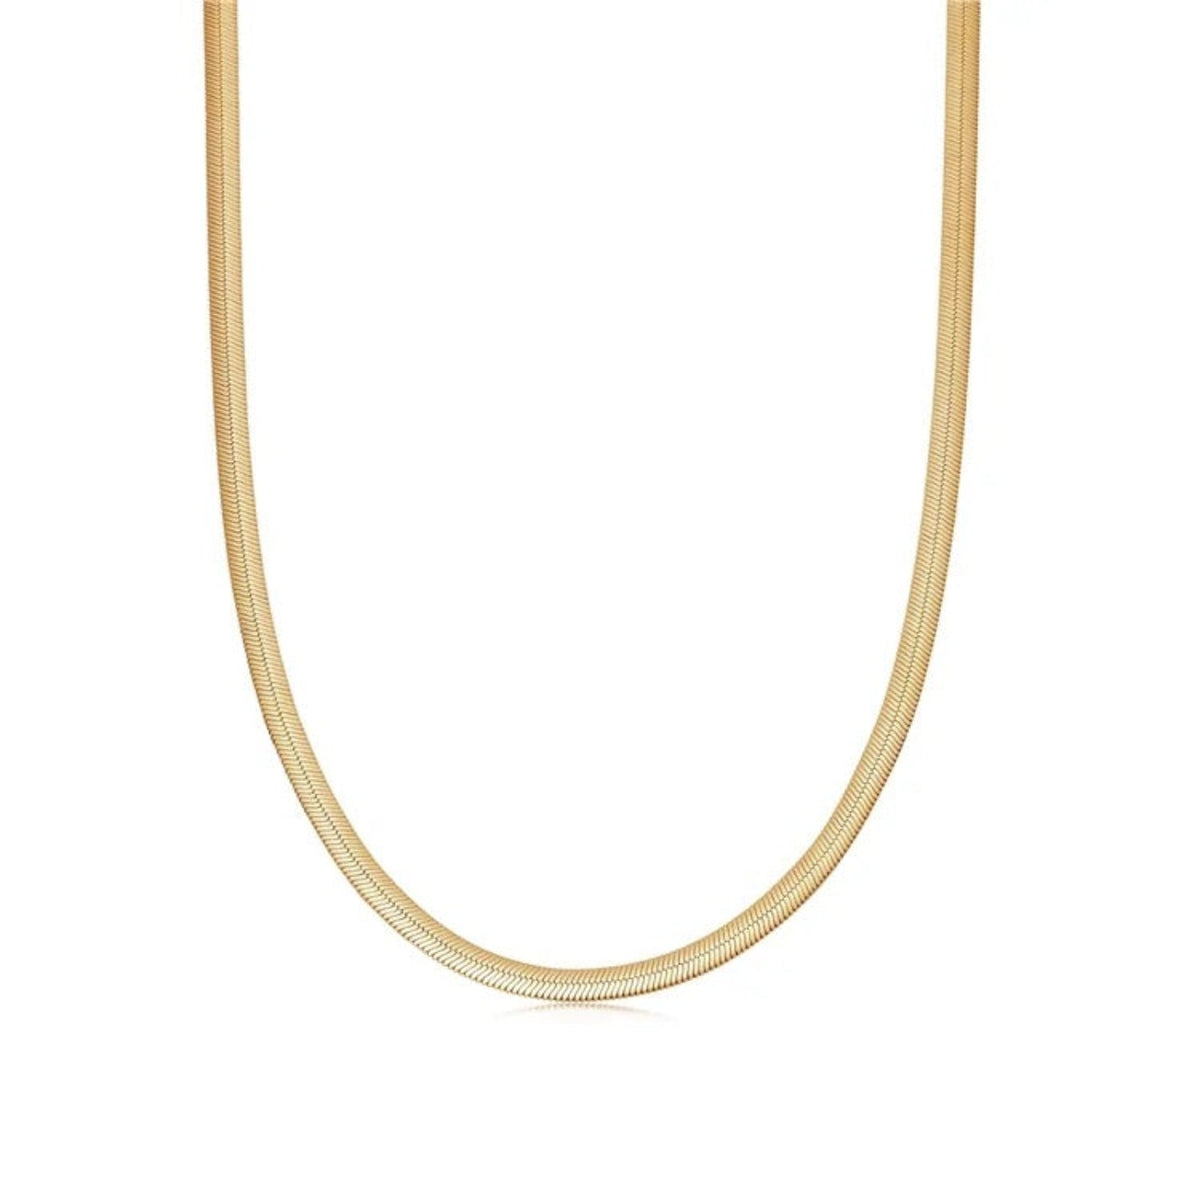 18k gold plated necklace may-i reliquia frankly my dear 